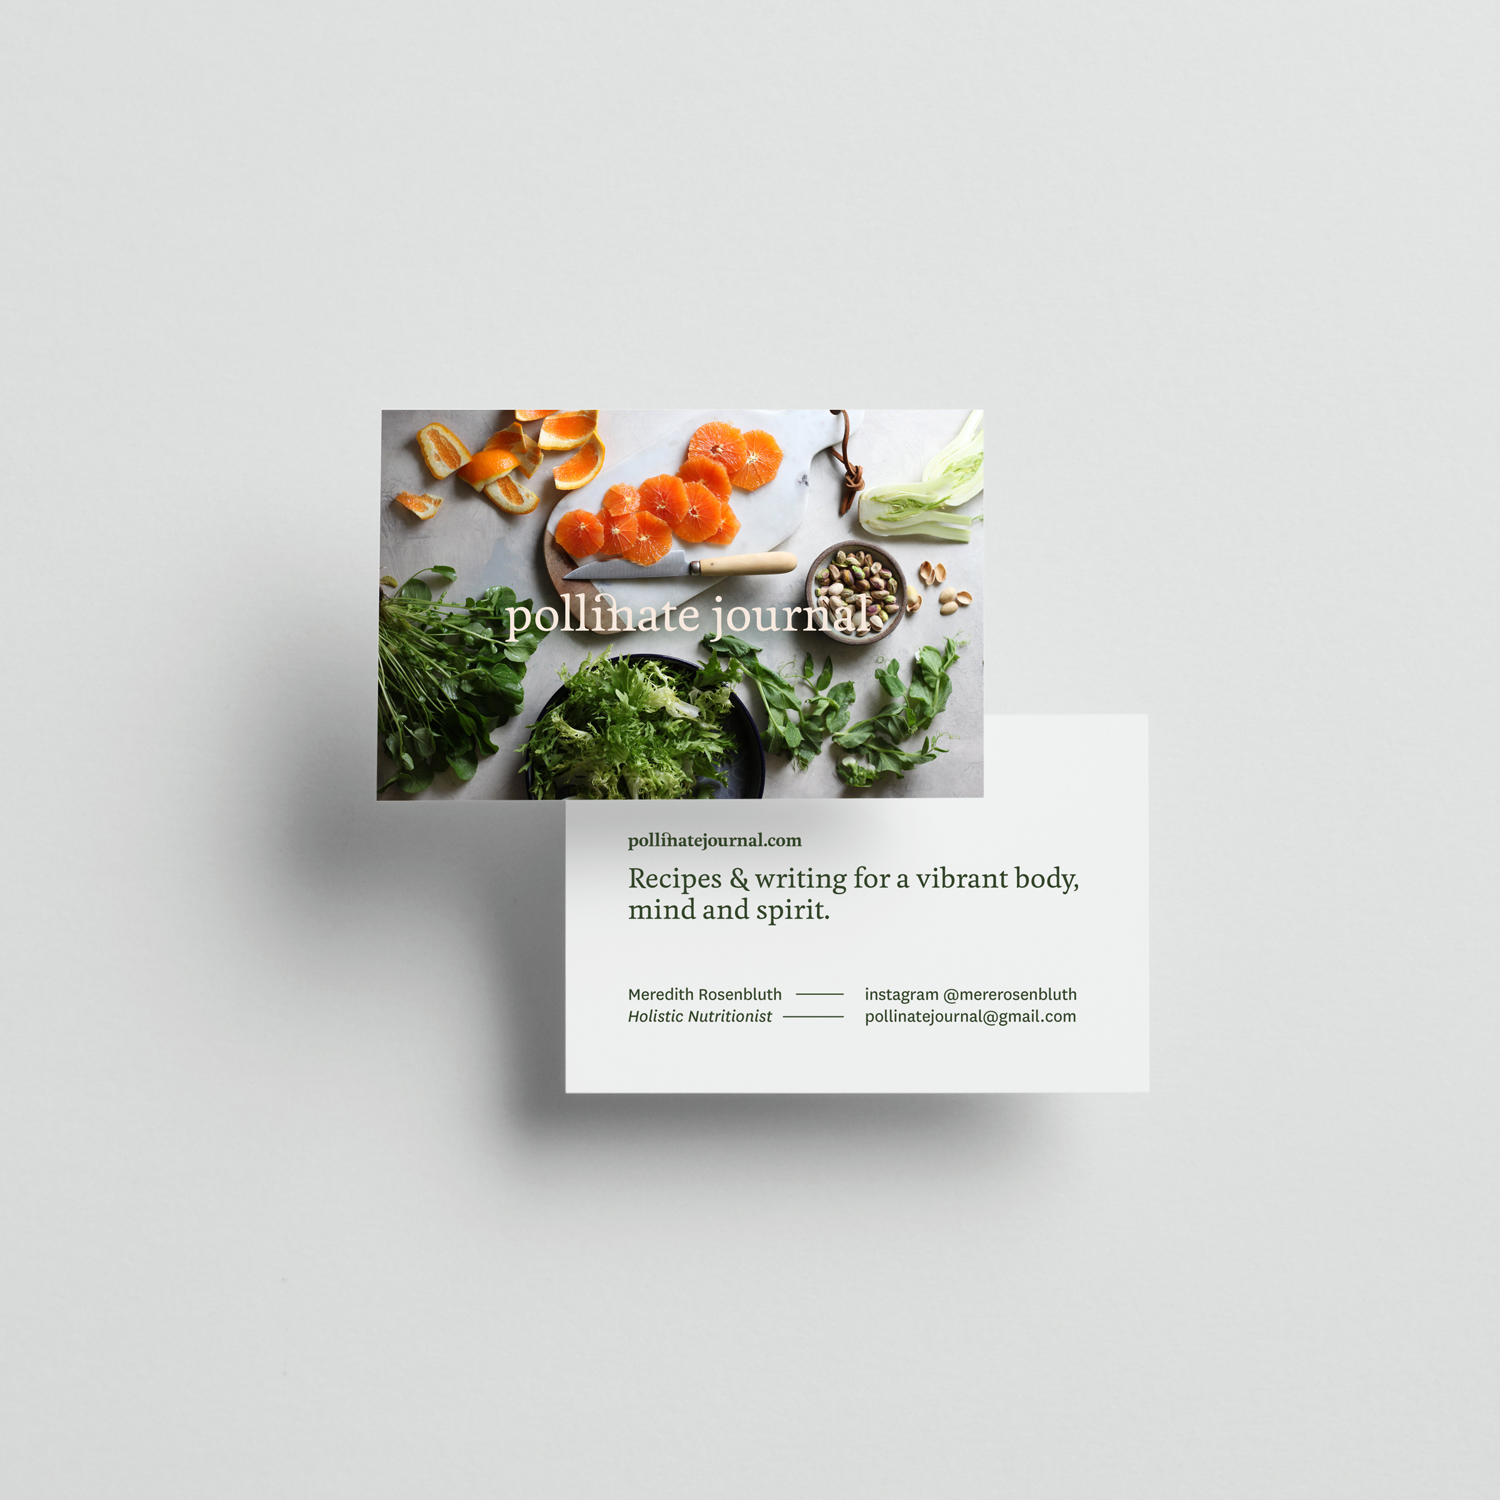 pollinate-journal-business-card